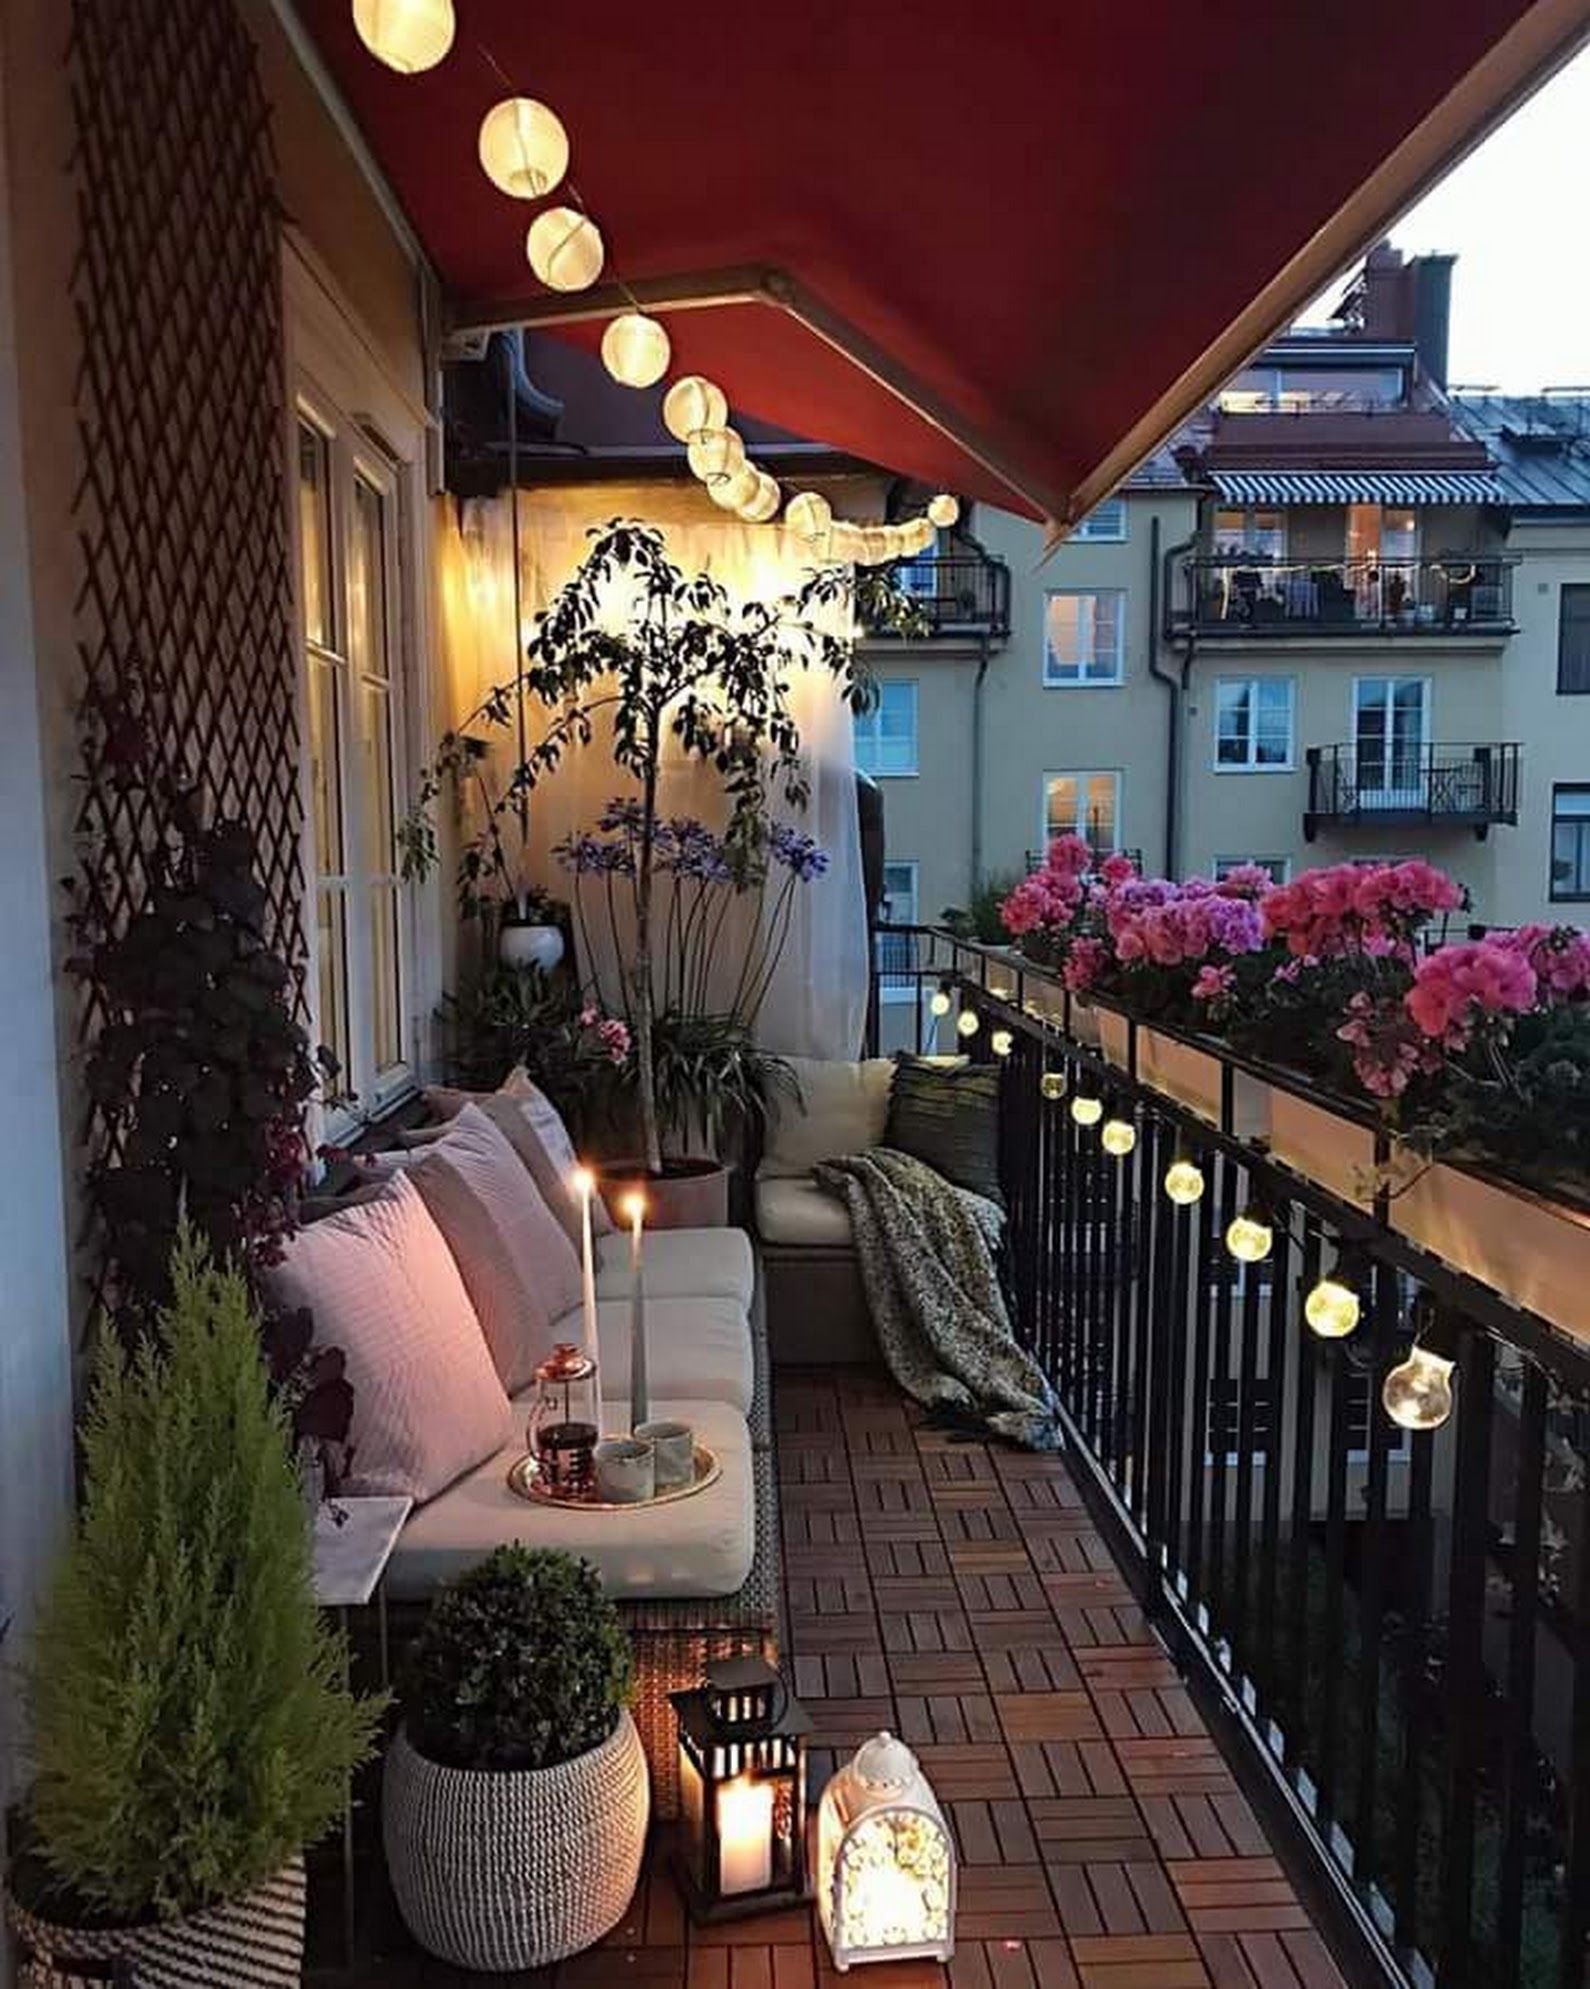 The Best Decorated Small Outdoor Balconies on Pinterest | Small Patio Decor Ideas | Boho Apartment Patio Inspiration | Outdoor Furniture Inspiration | Paper Lantern Lights Railing Flower Pots 